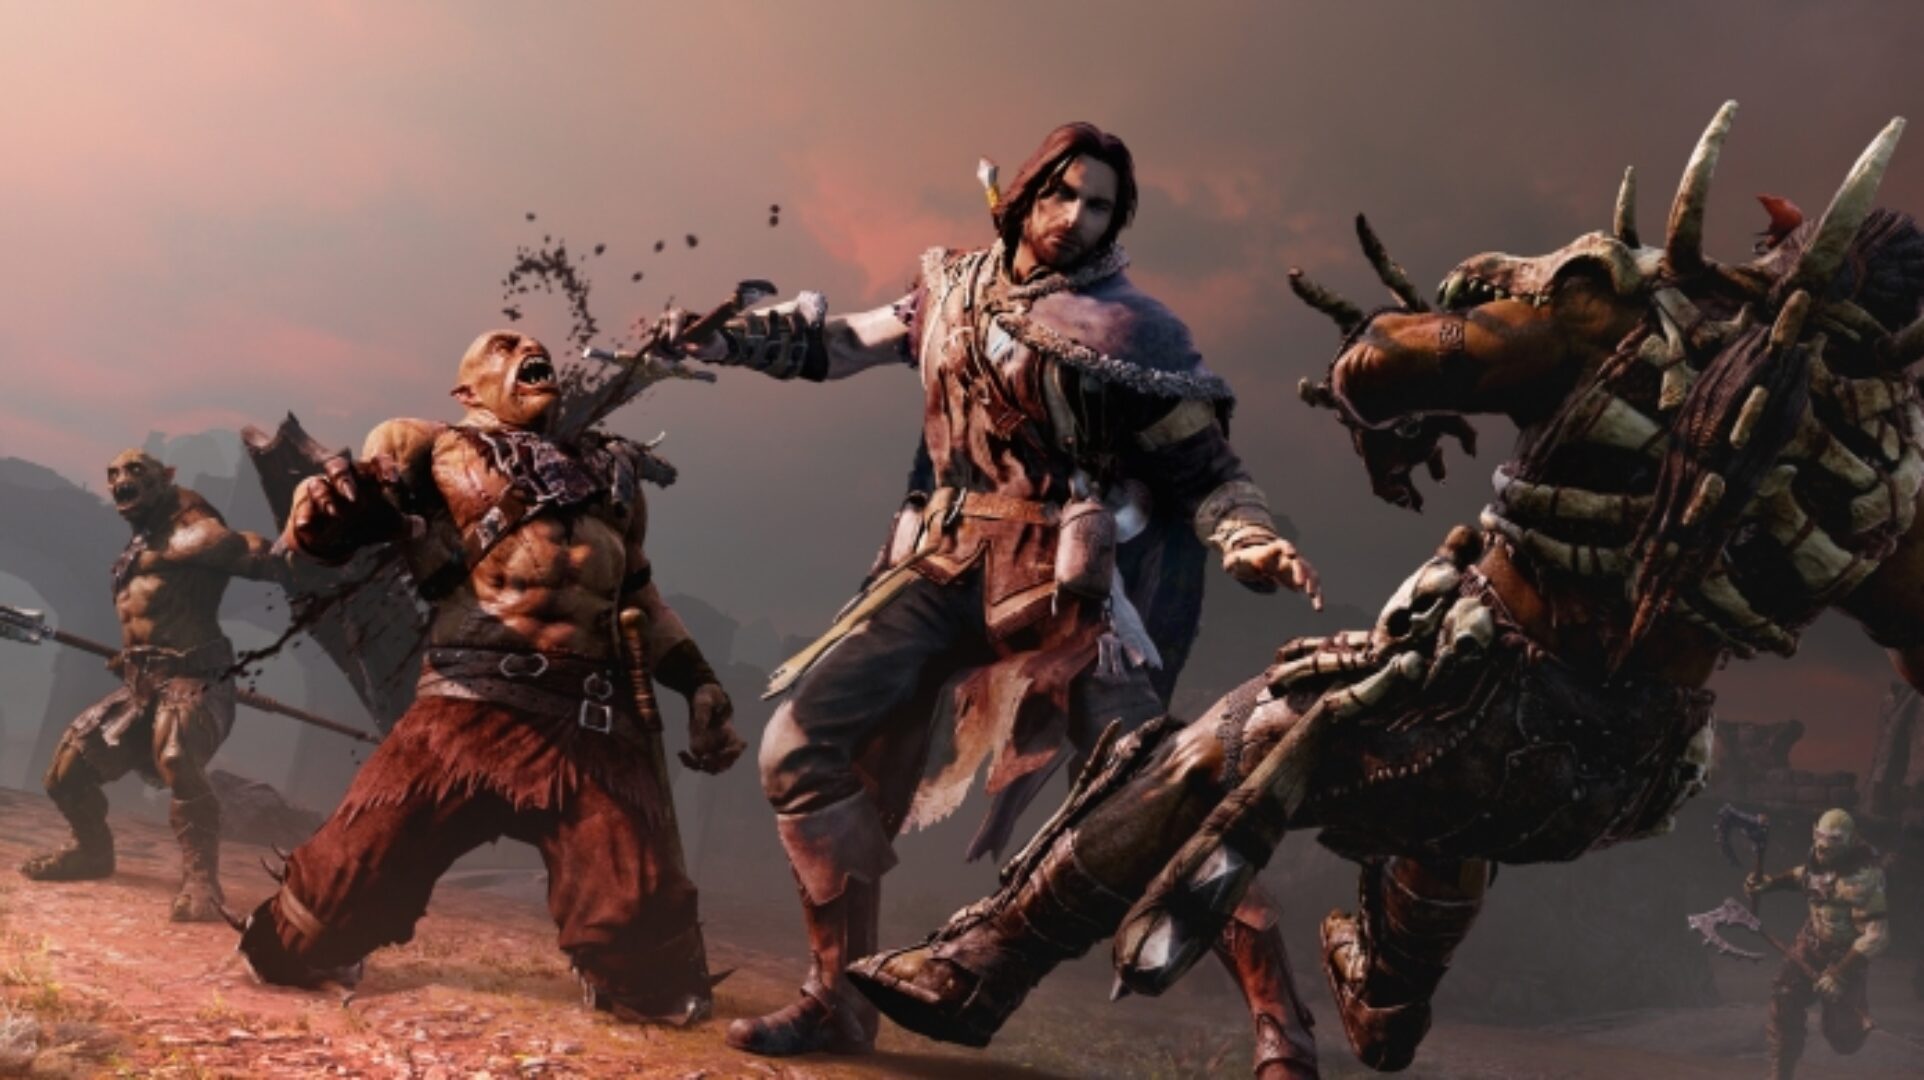 Shadow of Mordor Update – Nemesis Forge: Monolith Sticking True to “Nothing Will Be Forgotten”